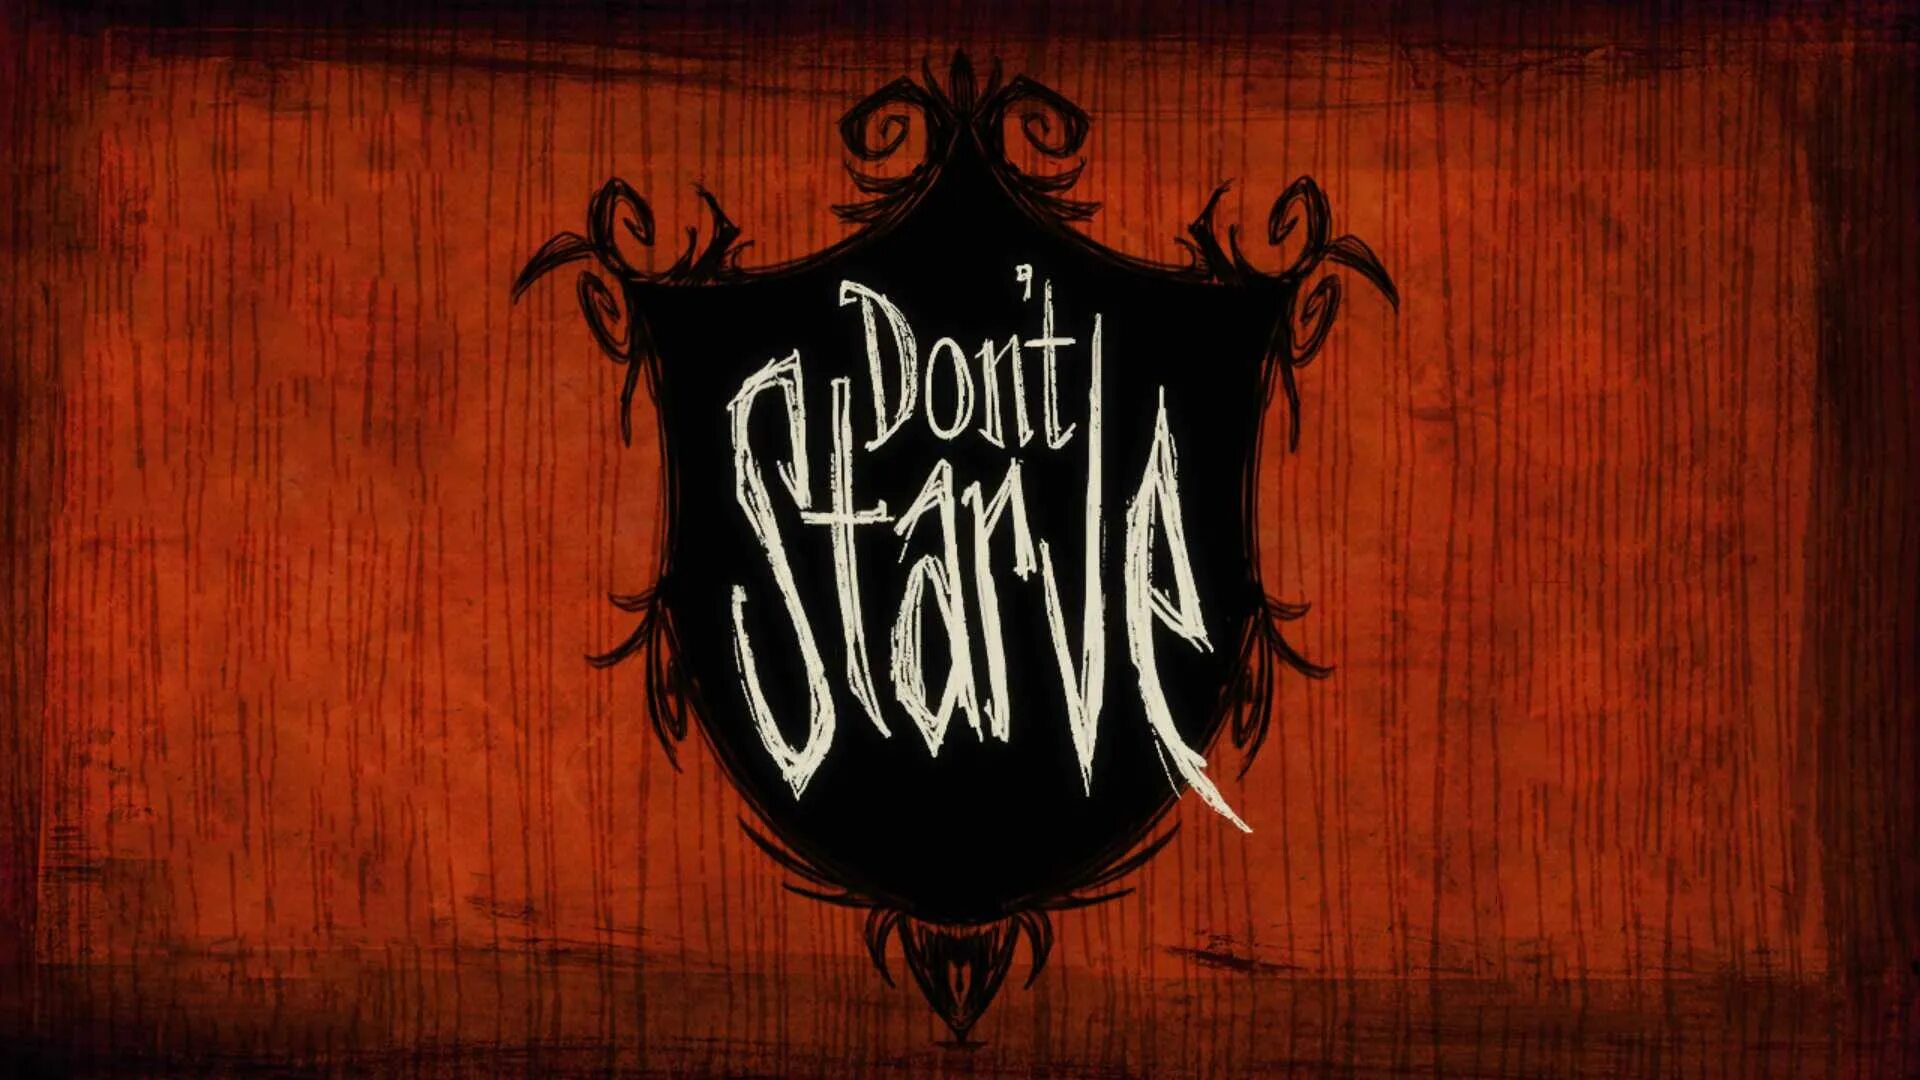 Don't Starve together menu. Don't Starve together меню. Don't Starve логотип. Don't Starve фон. Don t start new